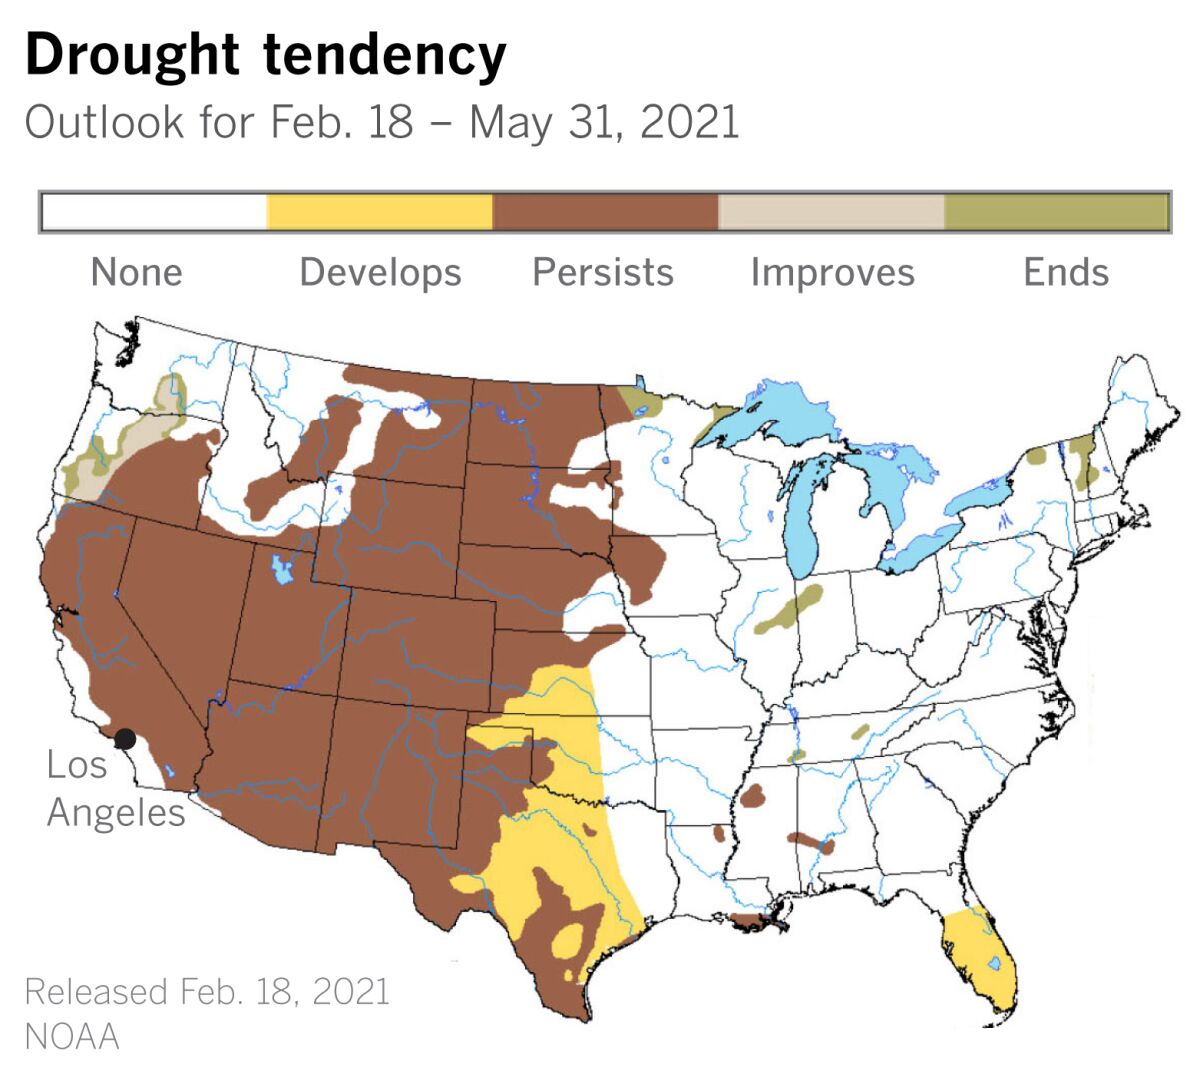 Map of the U.S. shows most of the West with an outlook for persistent drought